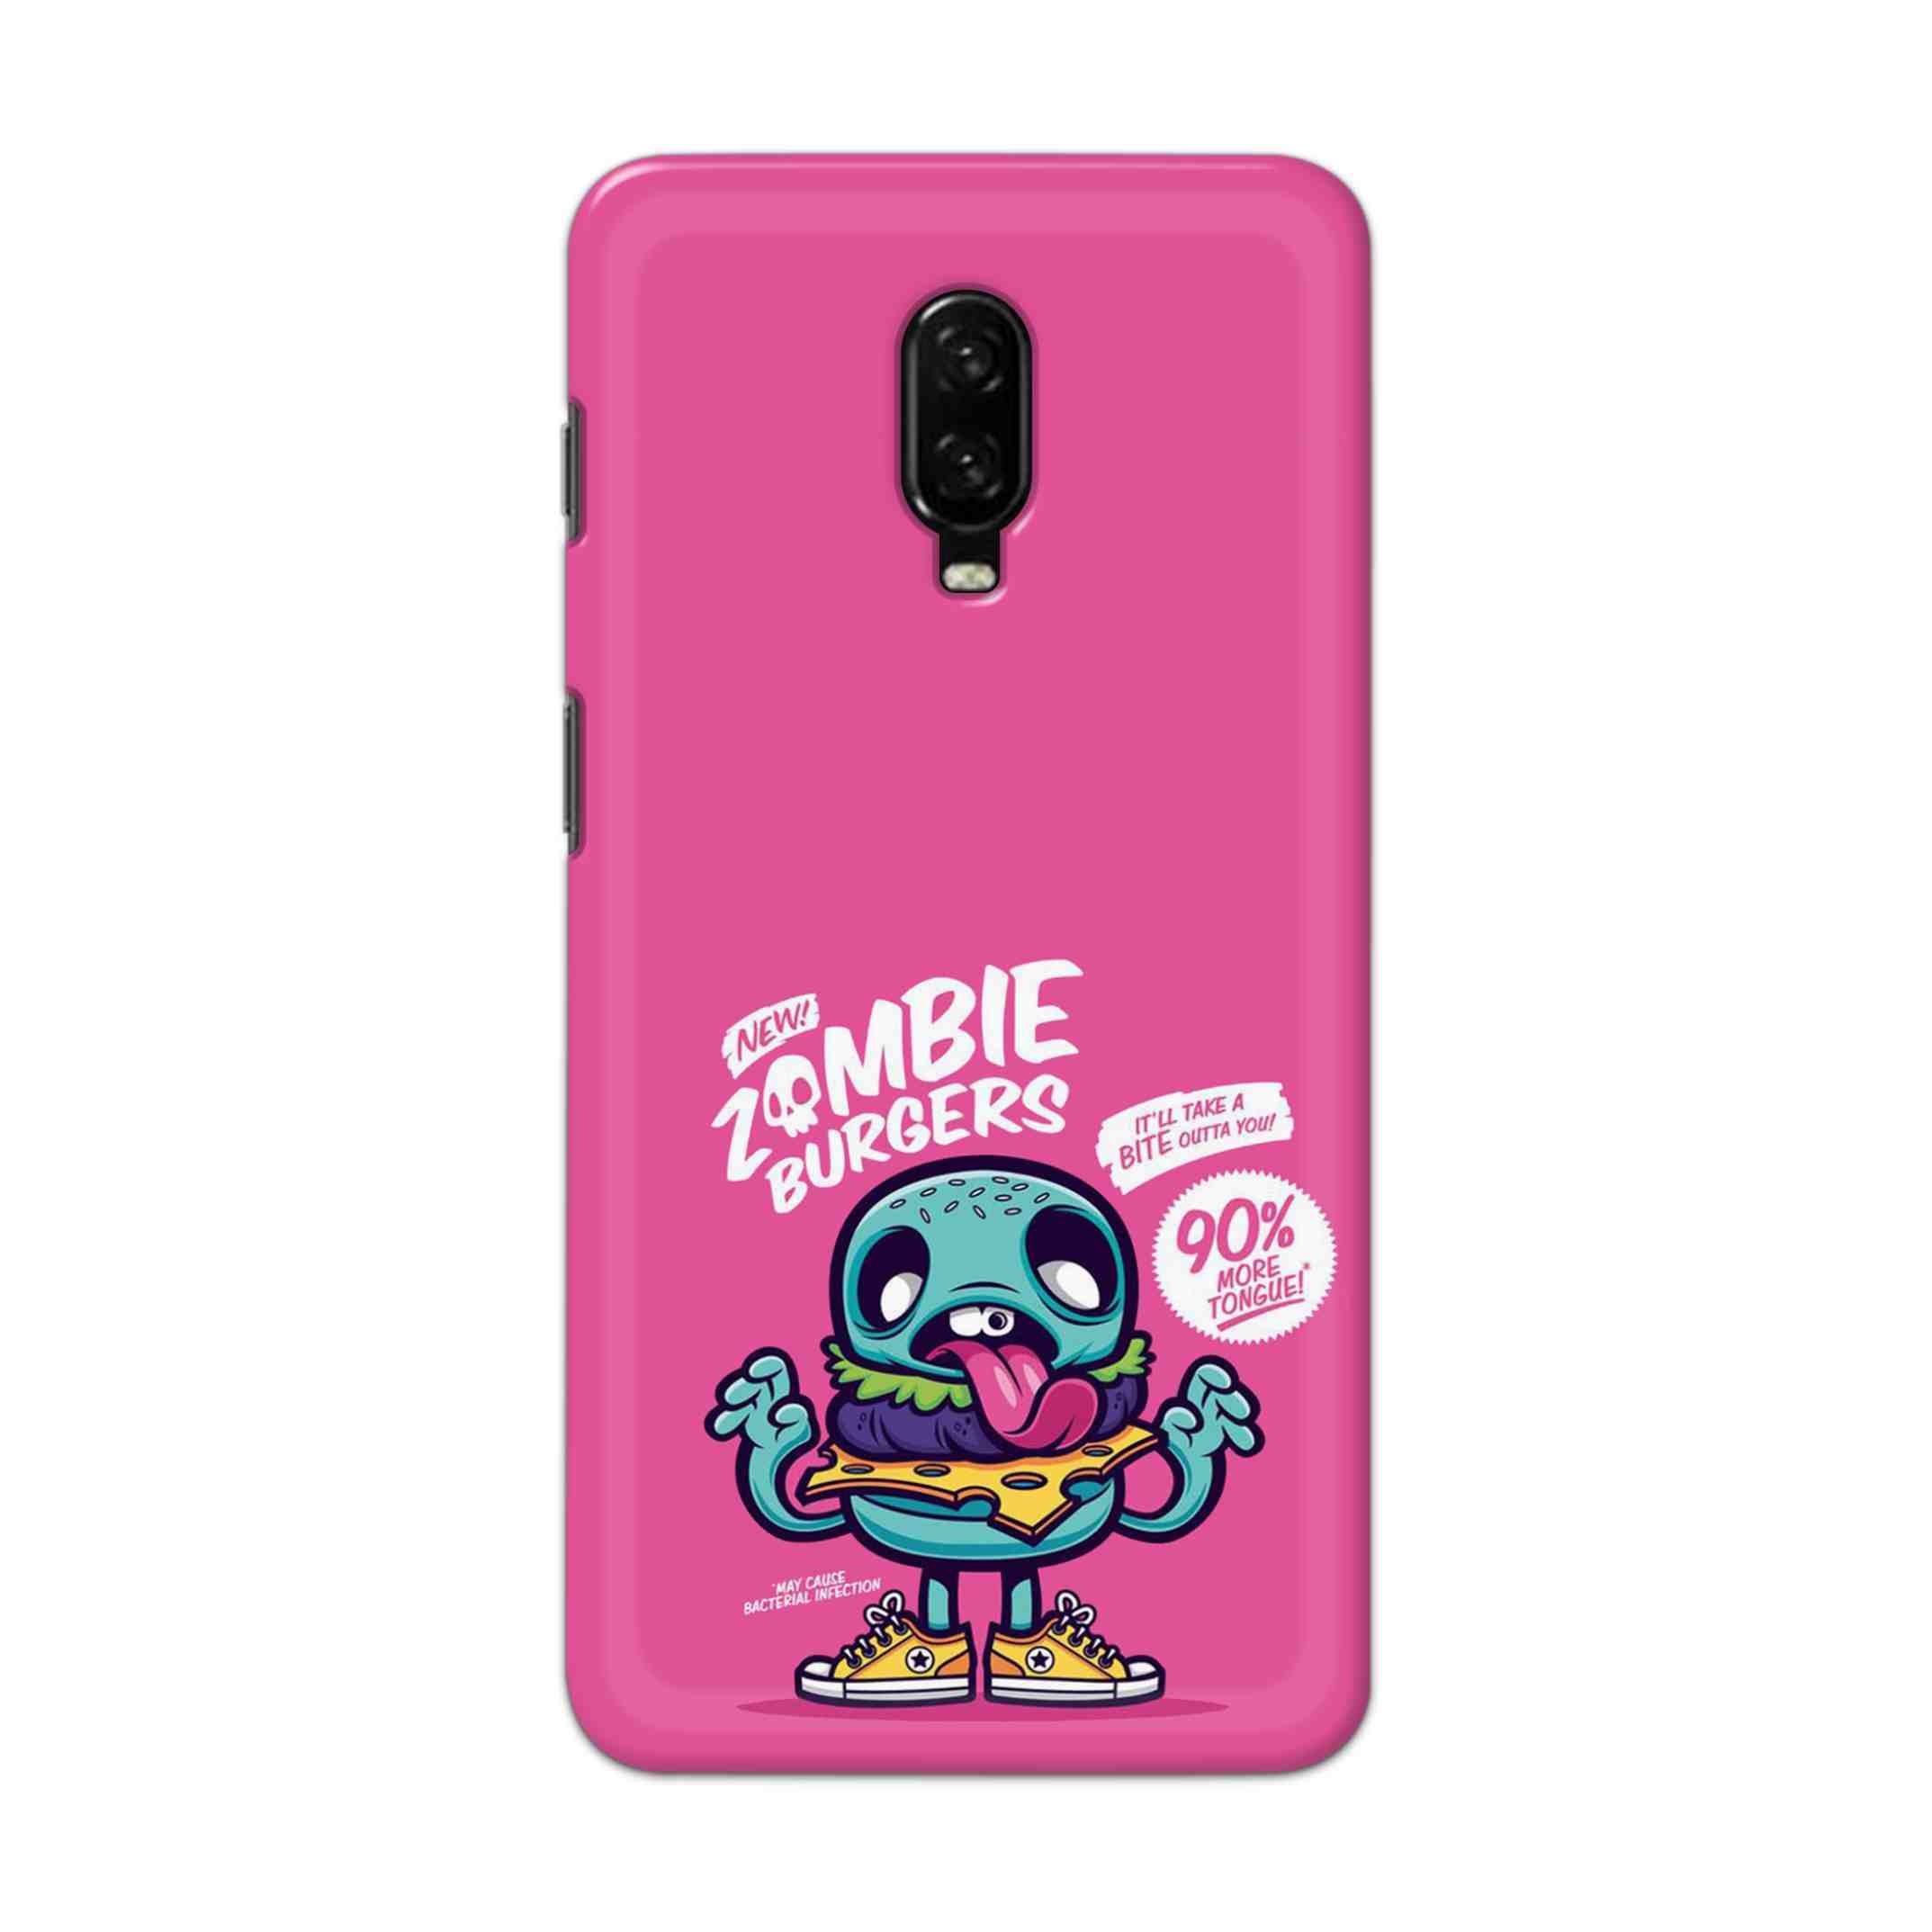 Buy New Zombie Burgers Hard Back Mobile Phone Case Cover For OnePlus 6T Online